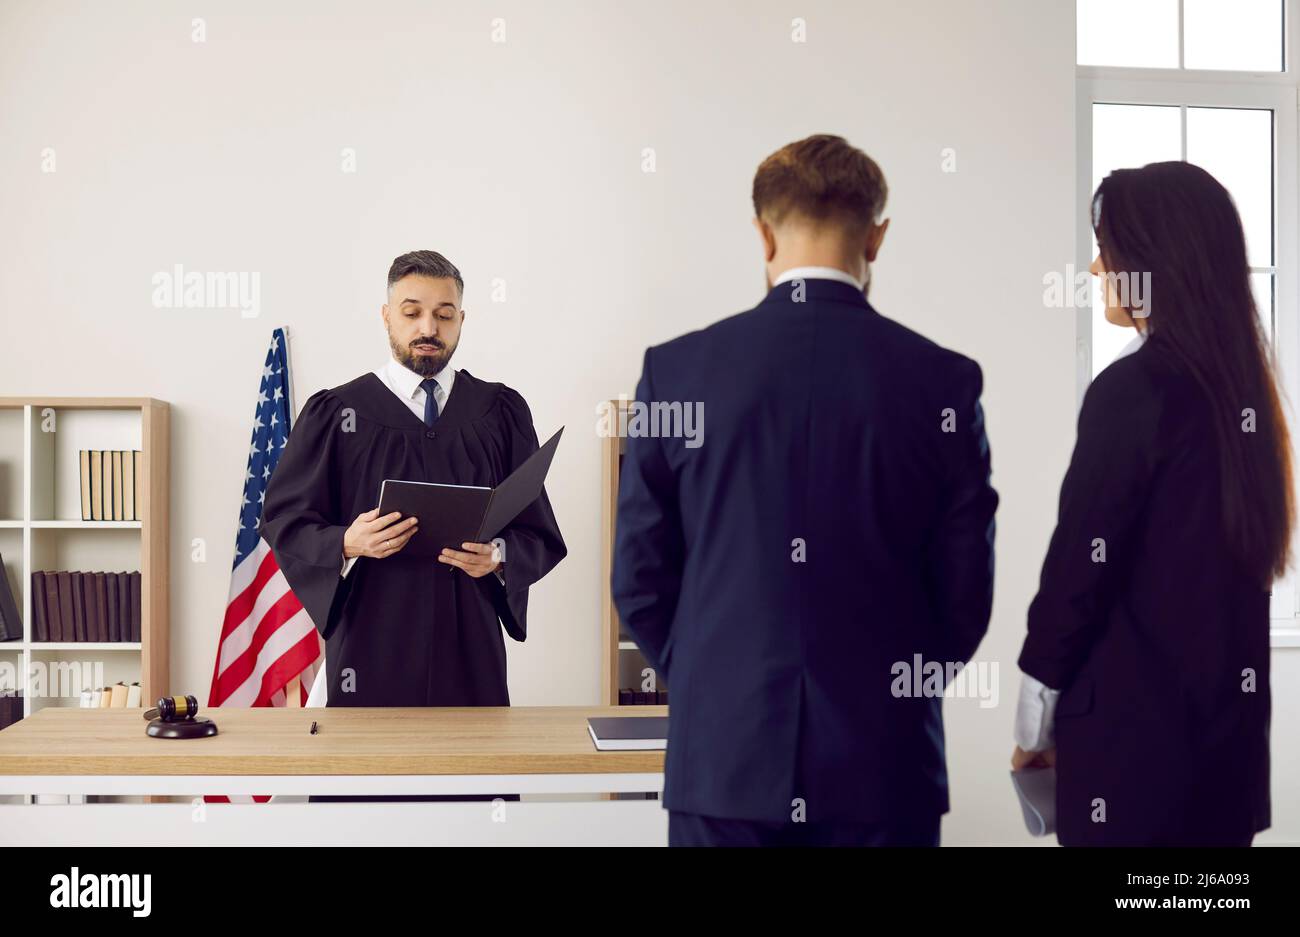 American judge in court of law gives his judgment and enforces punishment on young man Stock Photo